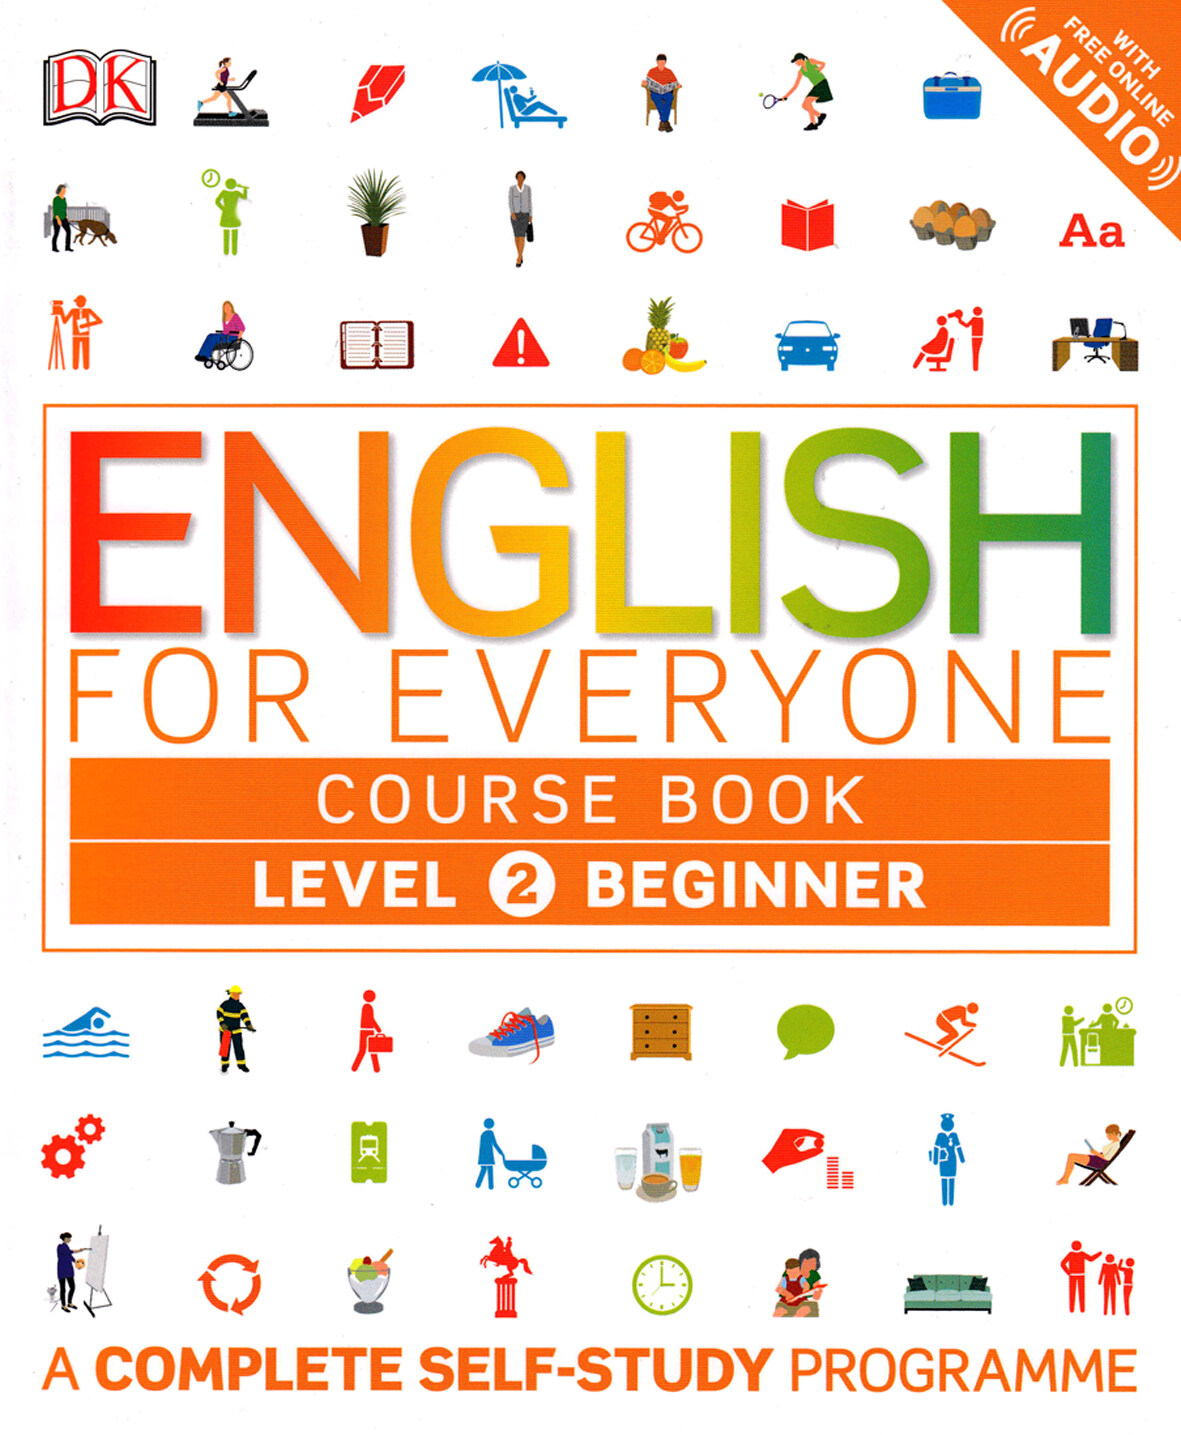 DK Today-ENGLISH FOR EVERYONE 2 COURSE BOOK